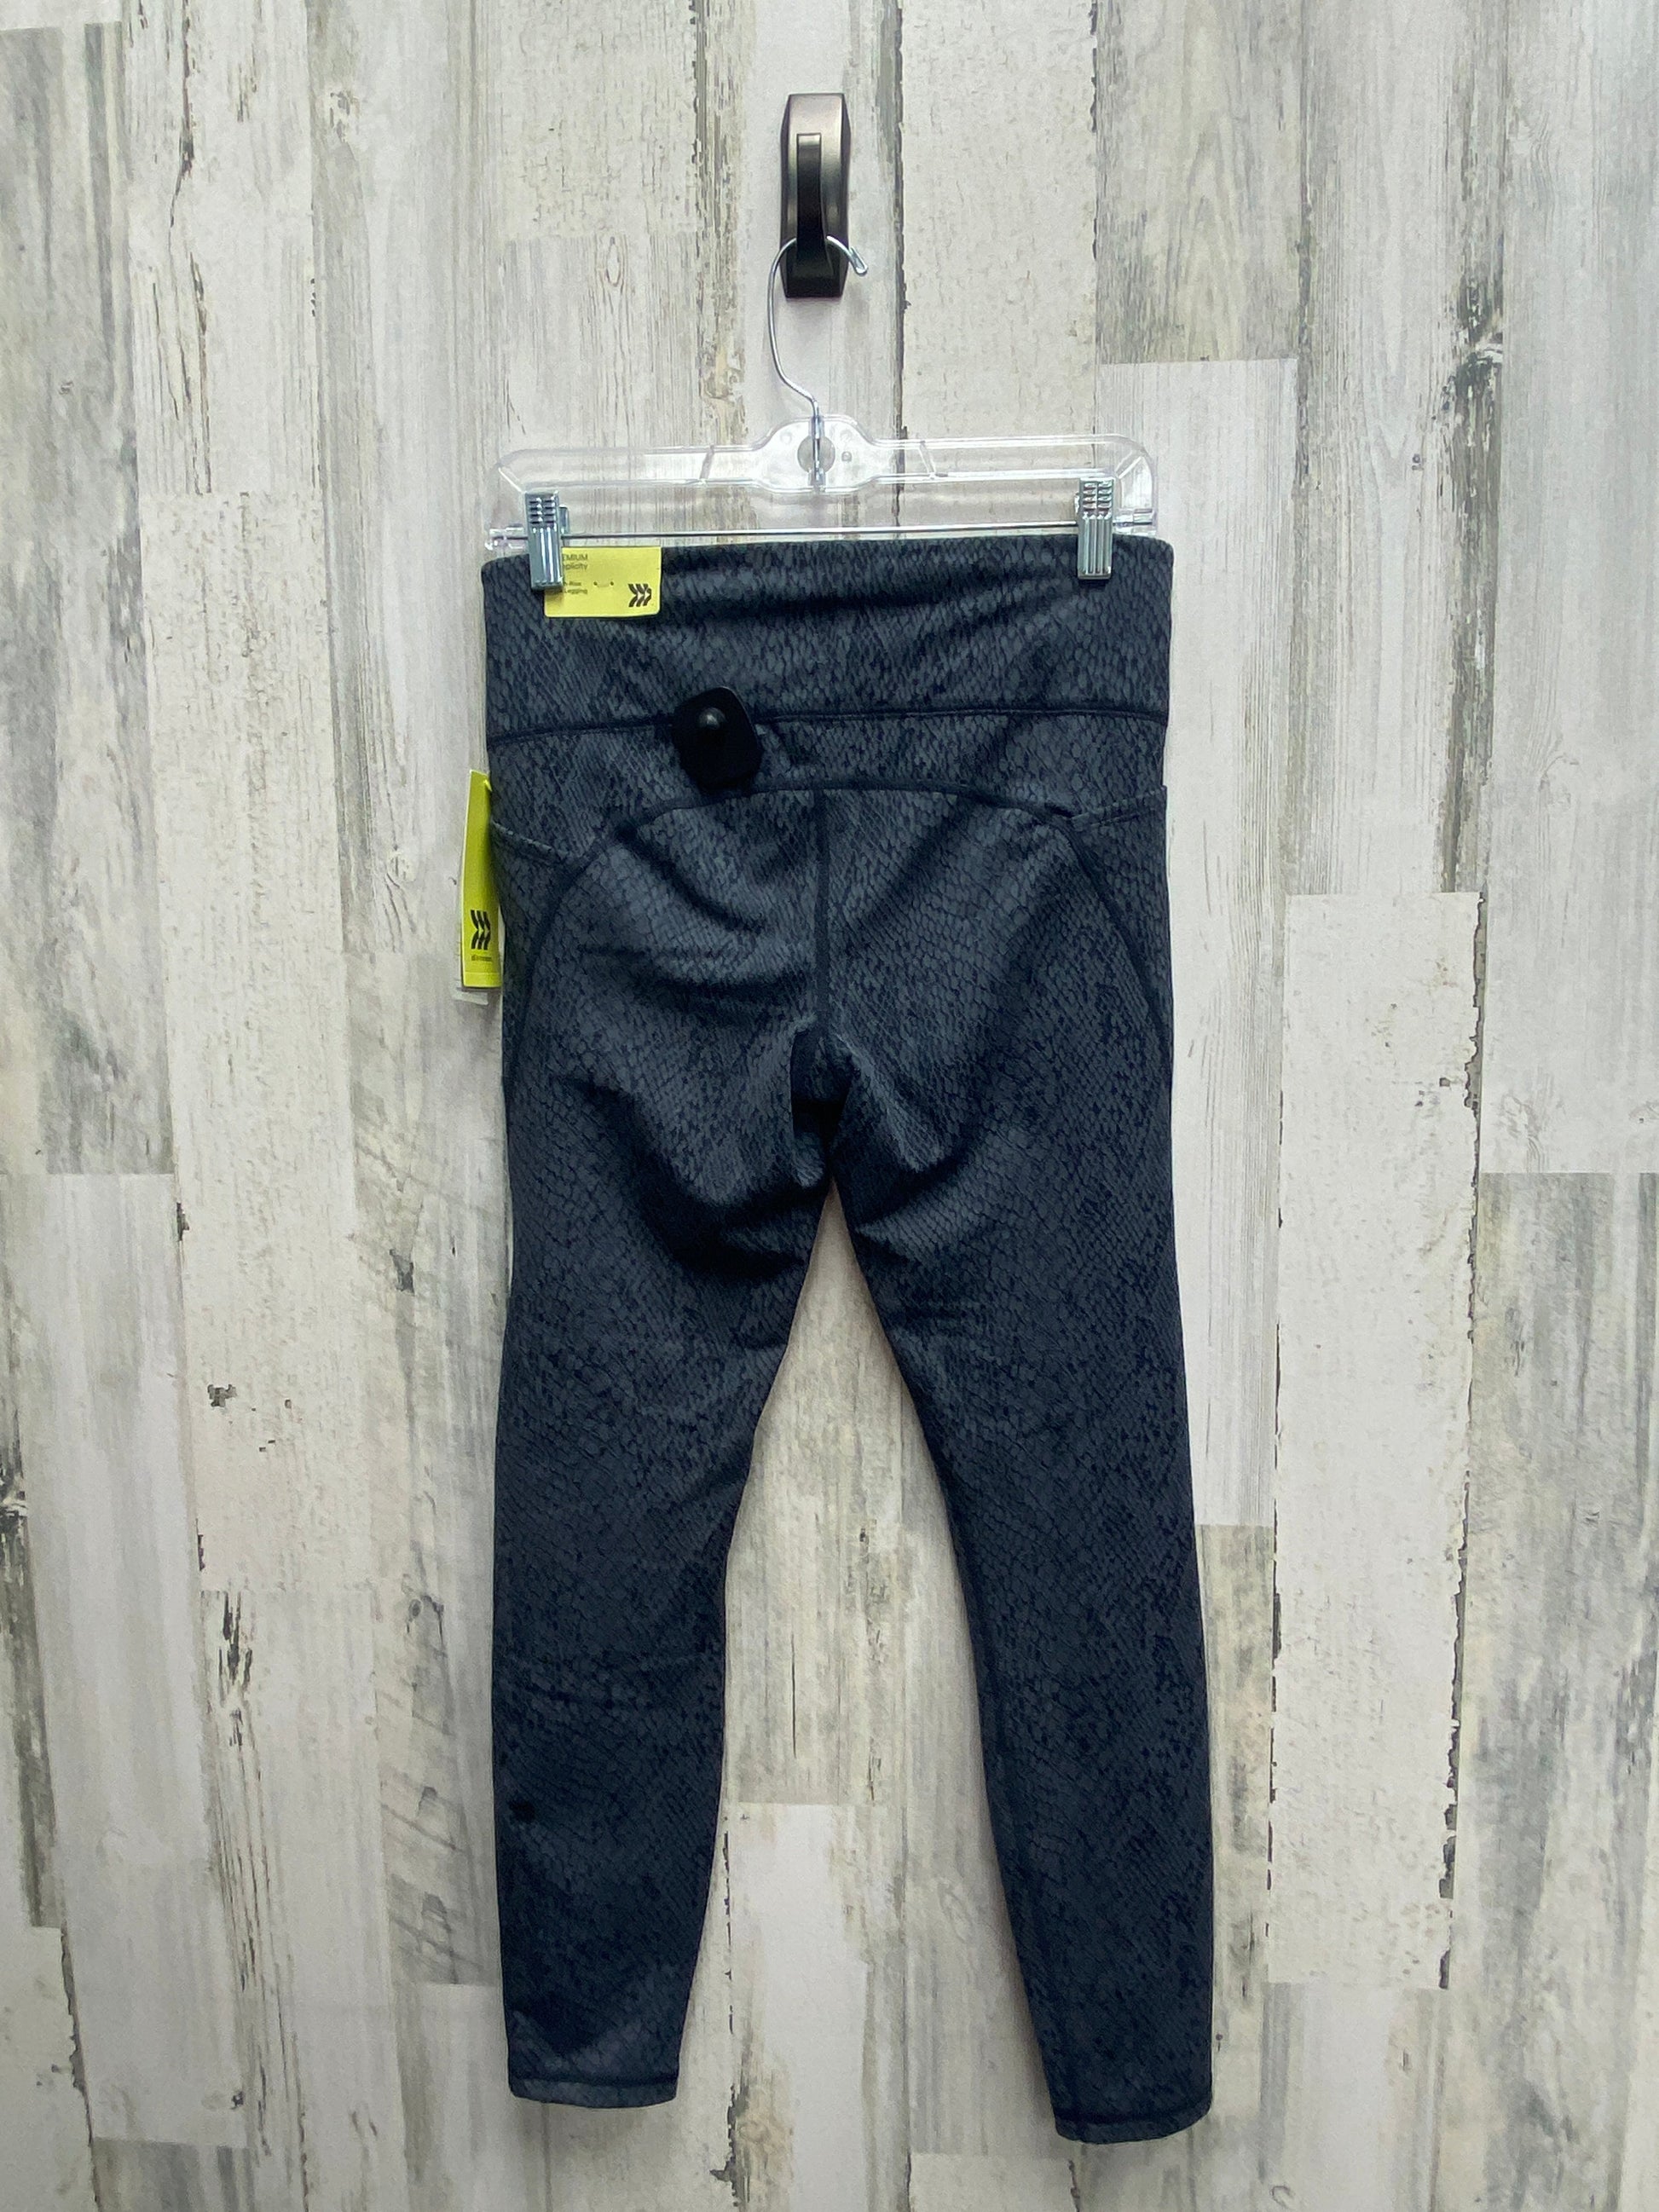 Athletic Pants By All In Motion Size: M